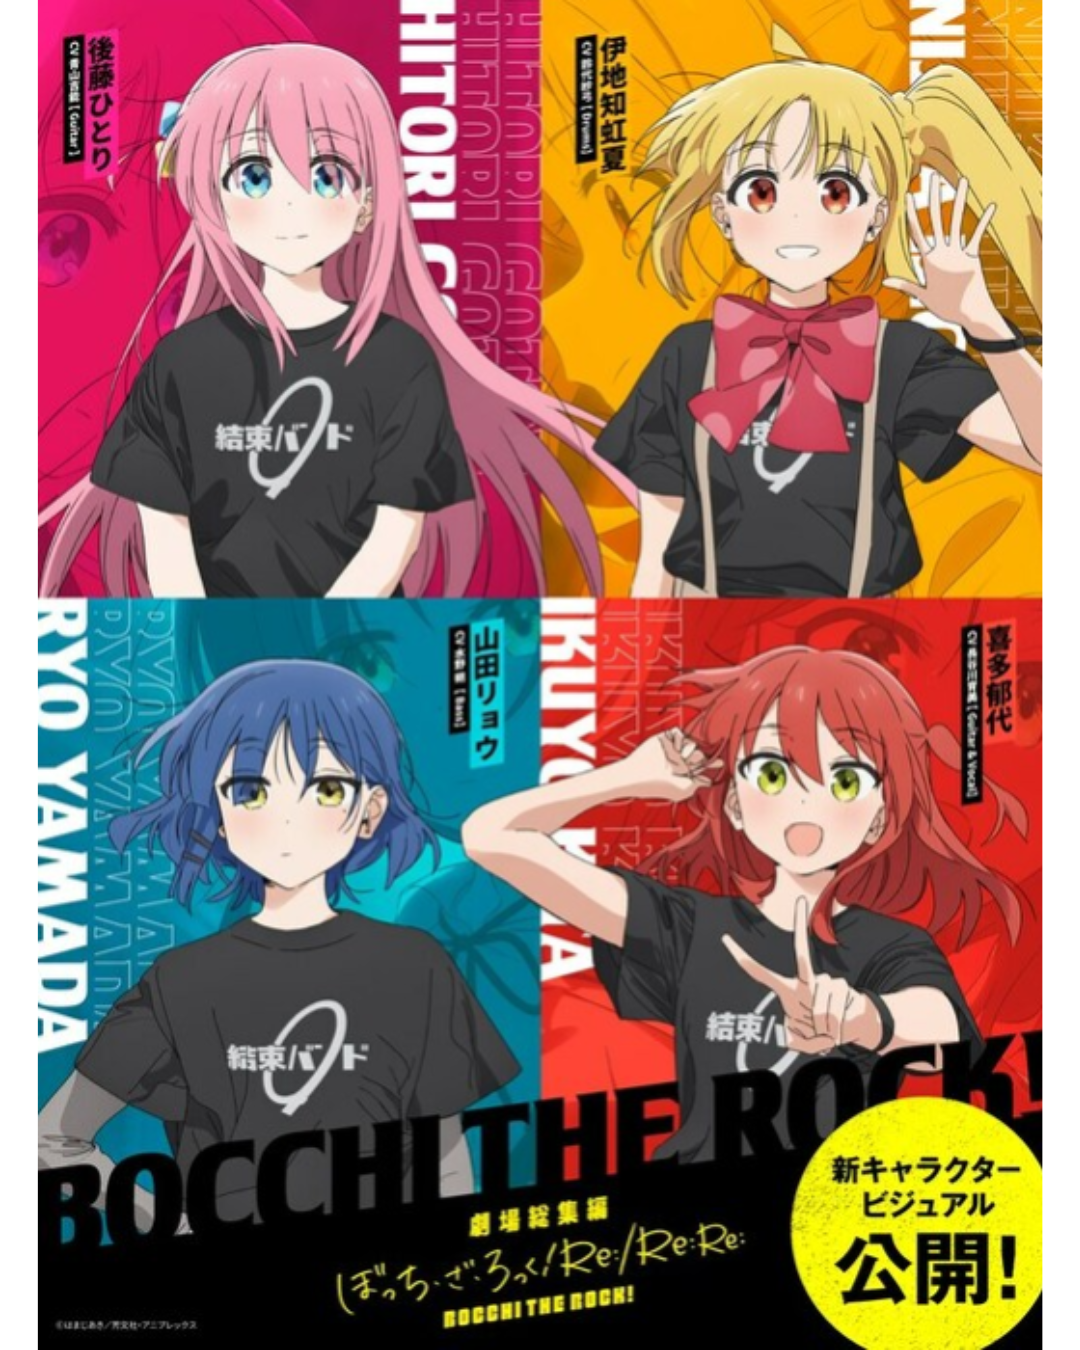 New character visuals have been released from the theatrical compilation "Bocchi the Rock!''.